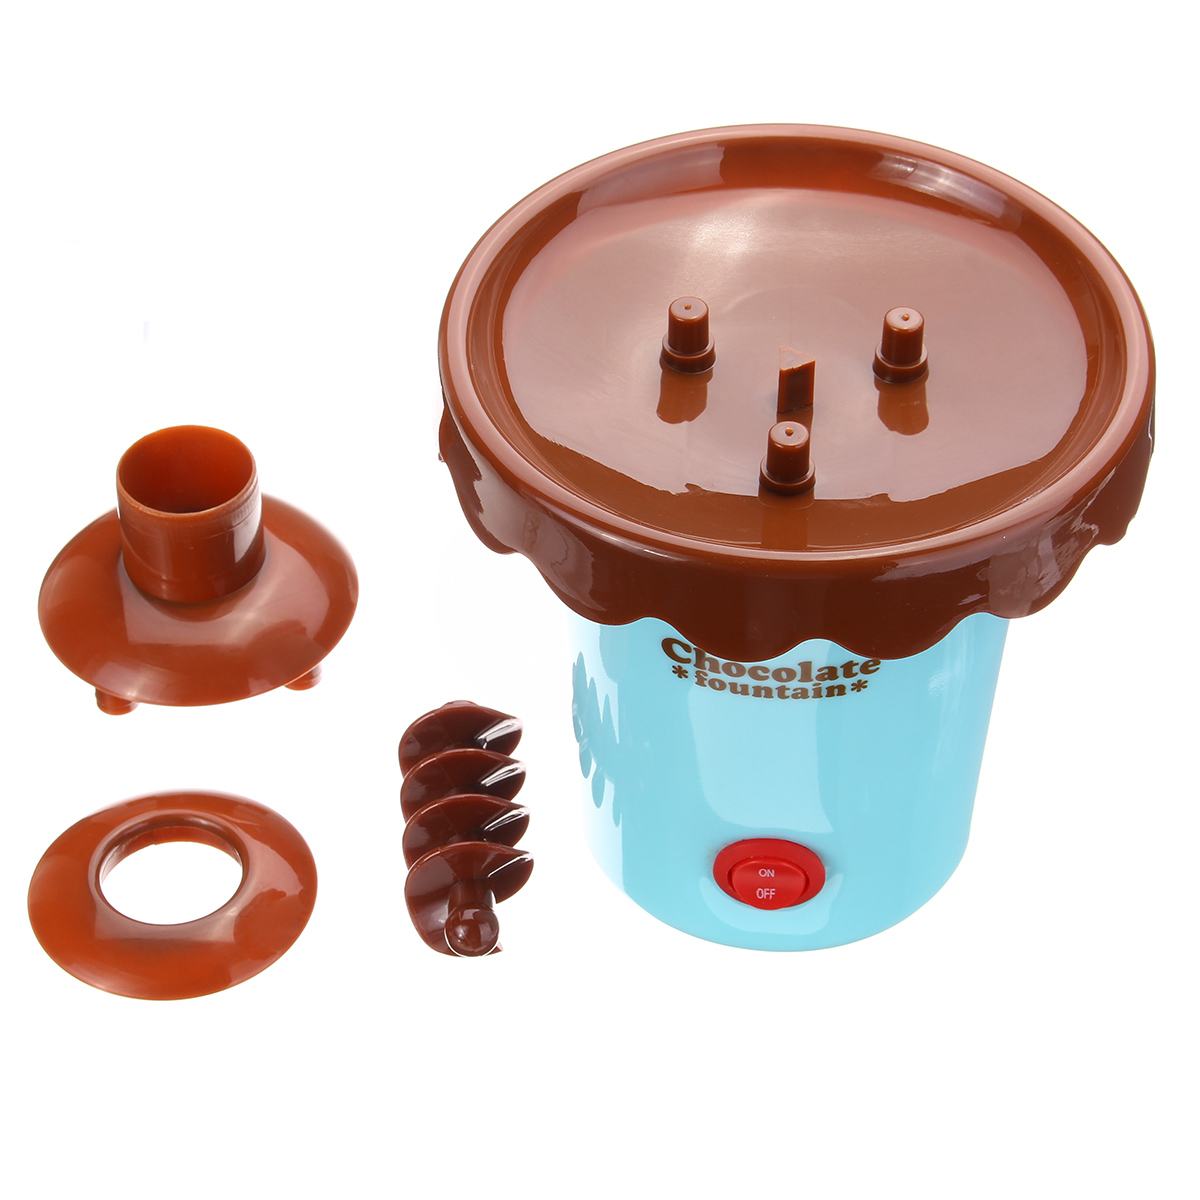 2 Tiers Mini Chocolate Fondue Maker Fountain Party Waterfall Melting Machine for Fruits Marshmallows Cookies Cake Wedding Party